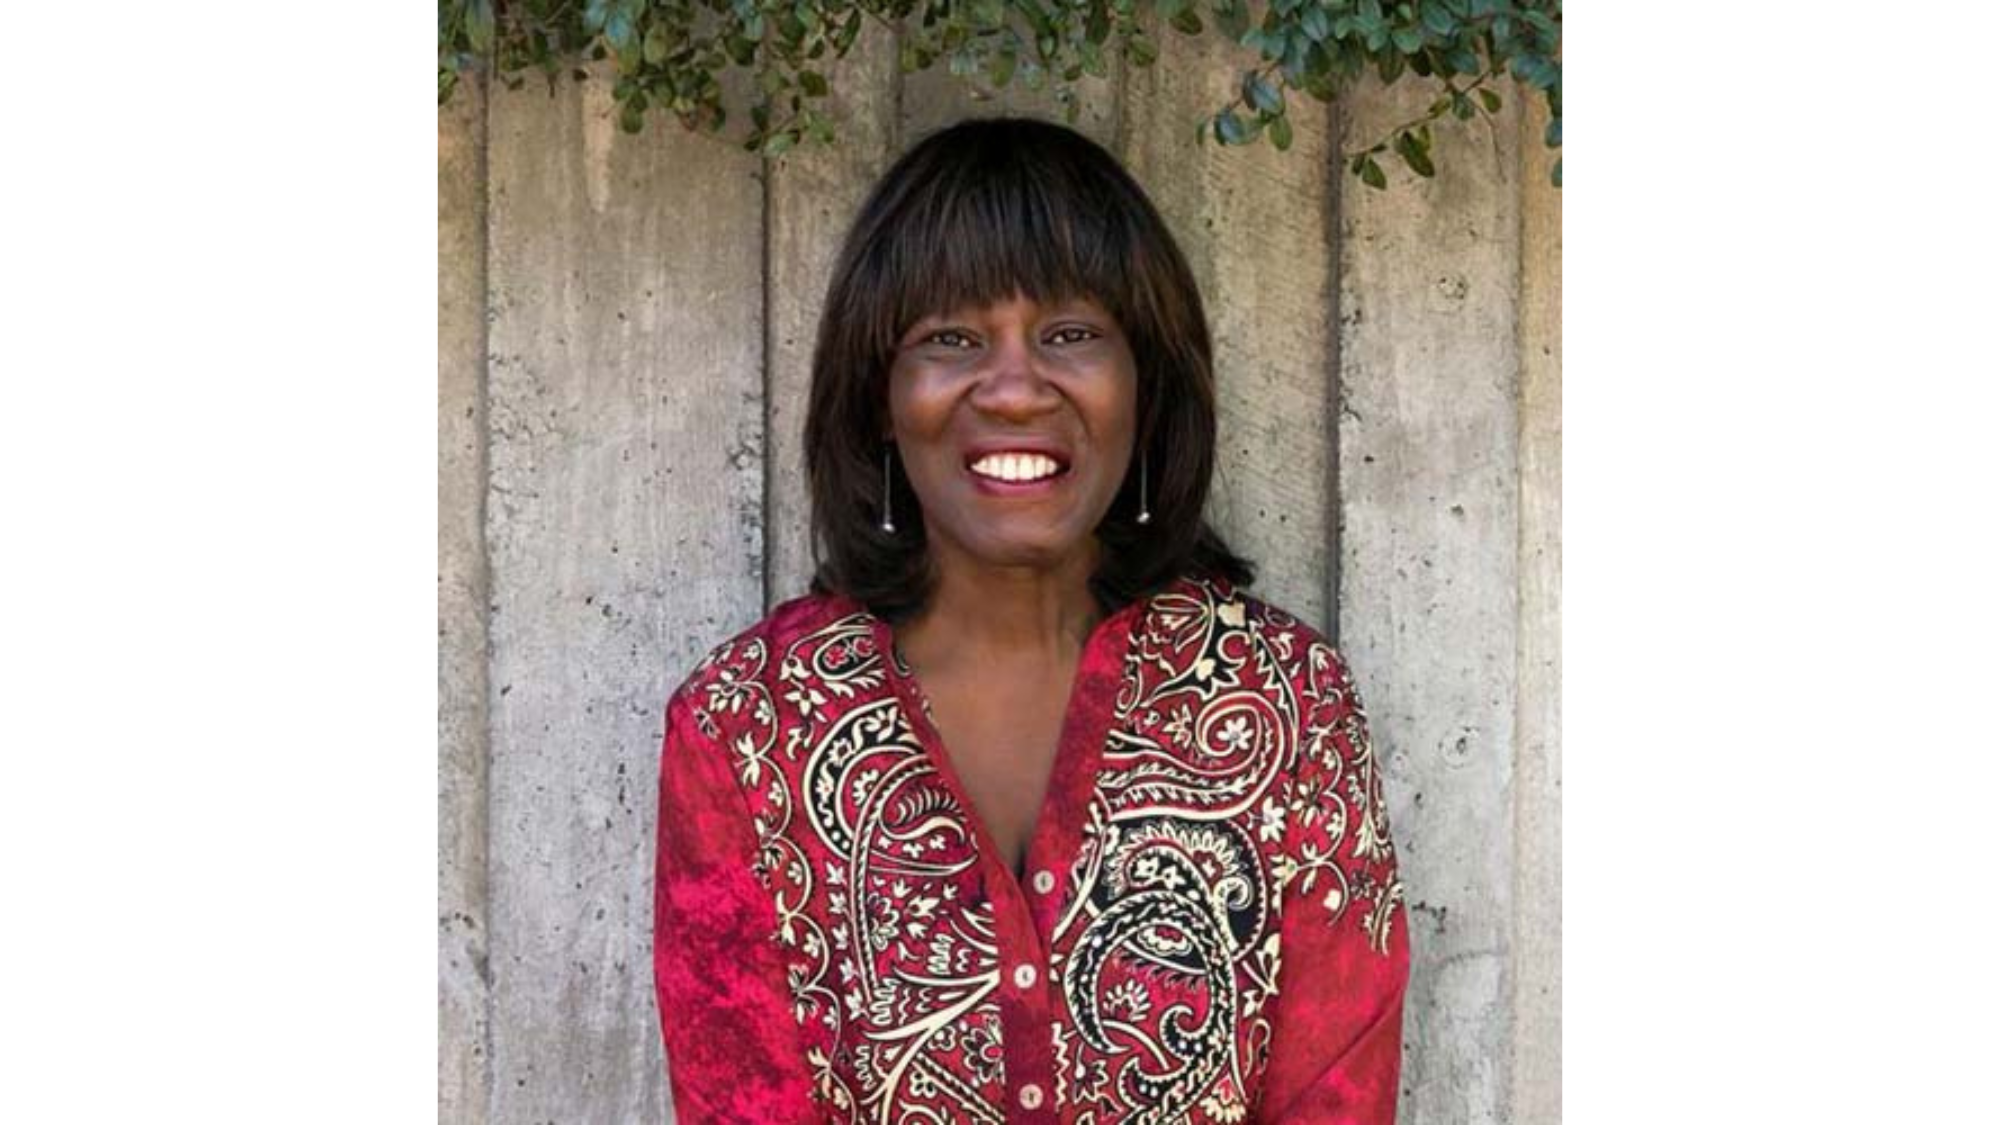 Patricia Smith, smiling, photographed against wooden backdrop.